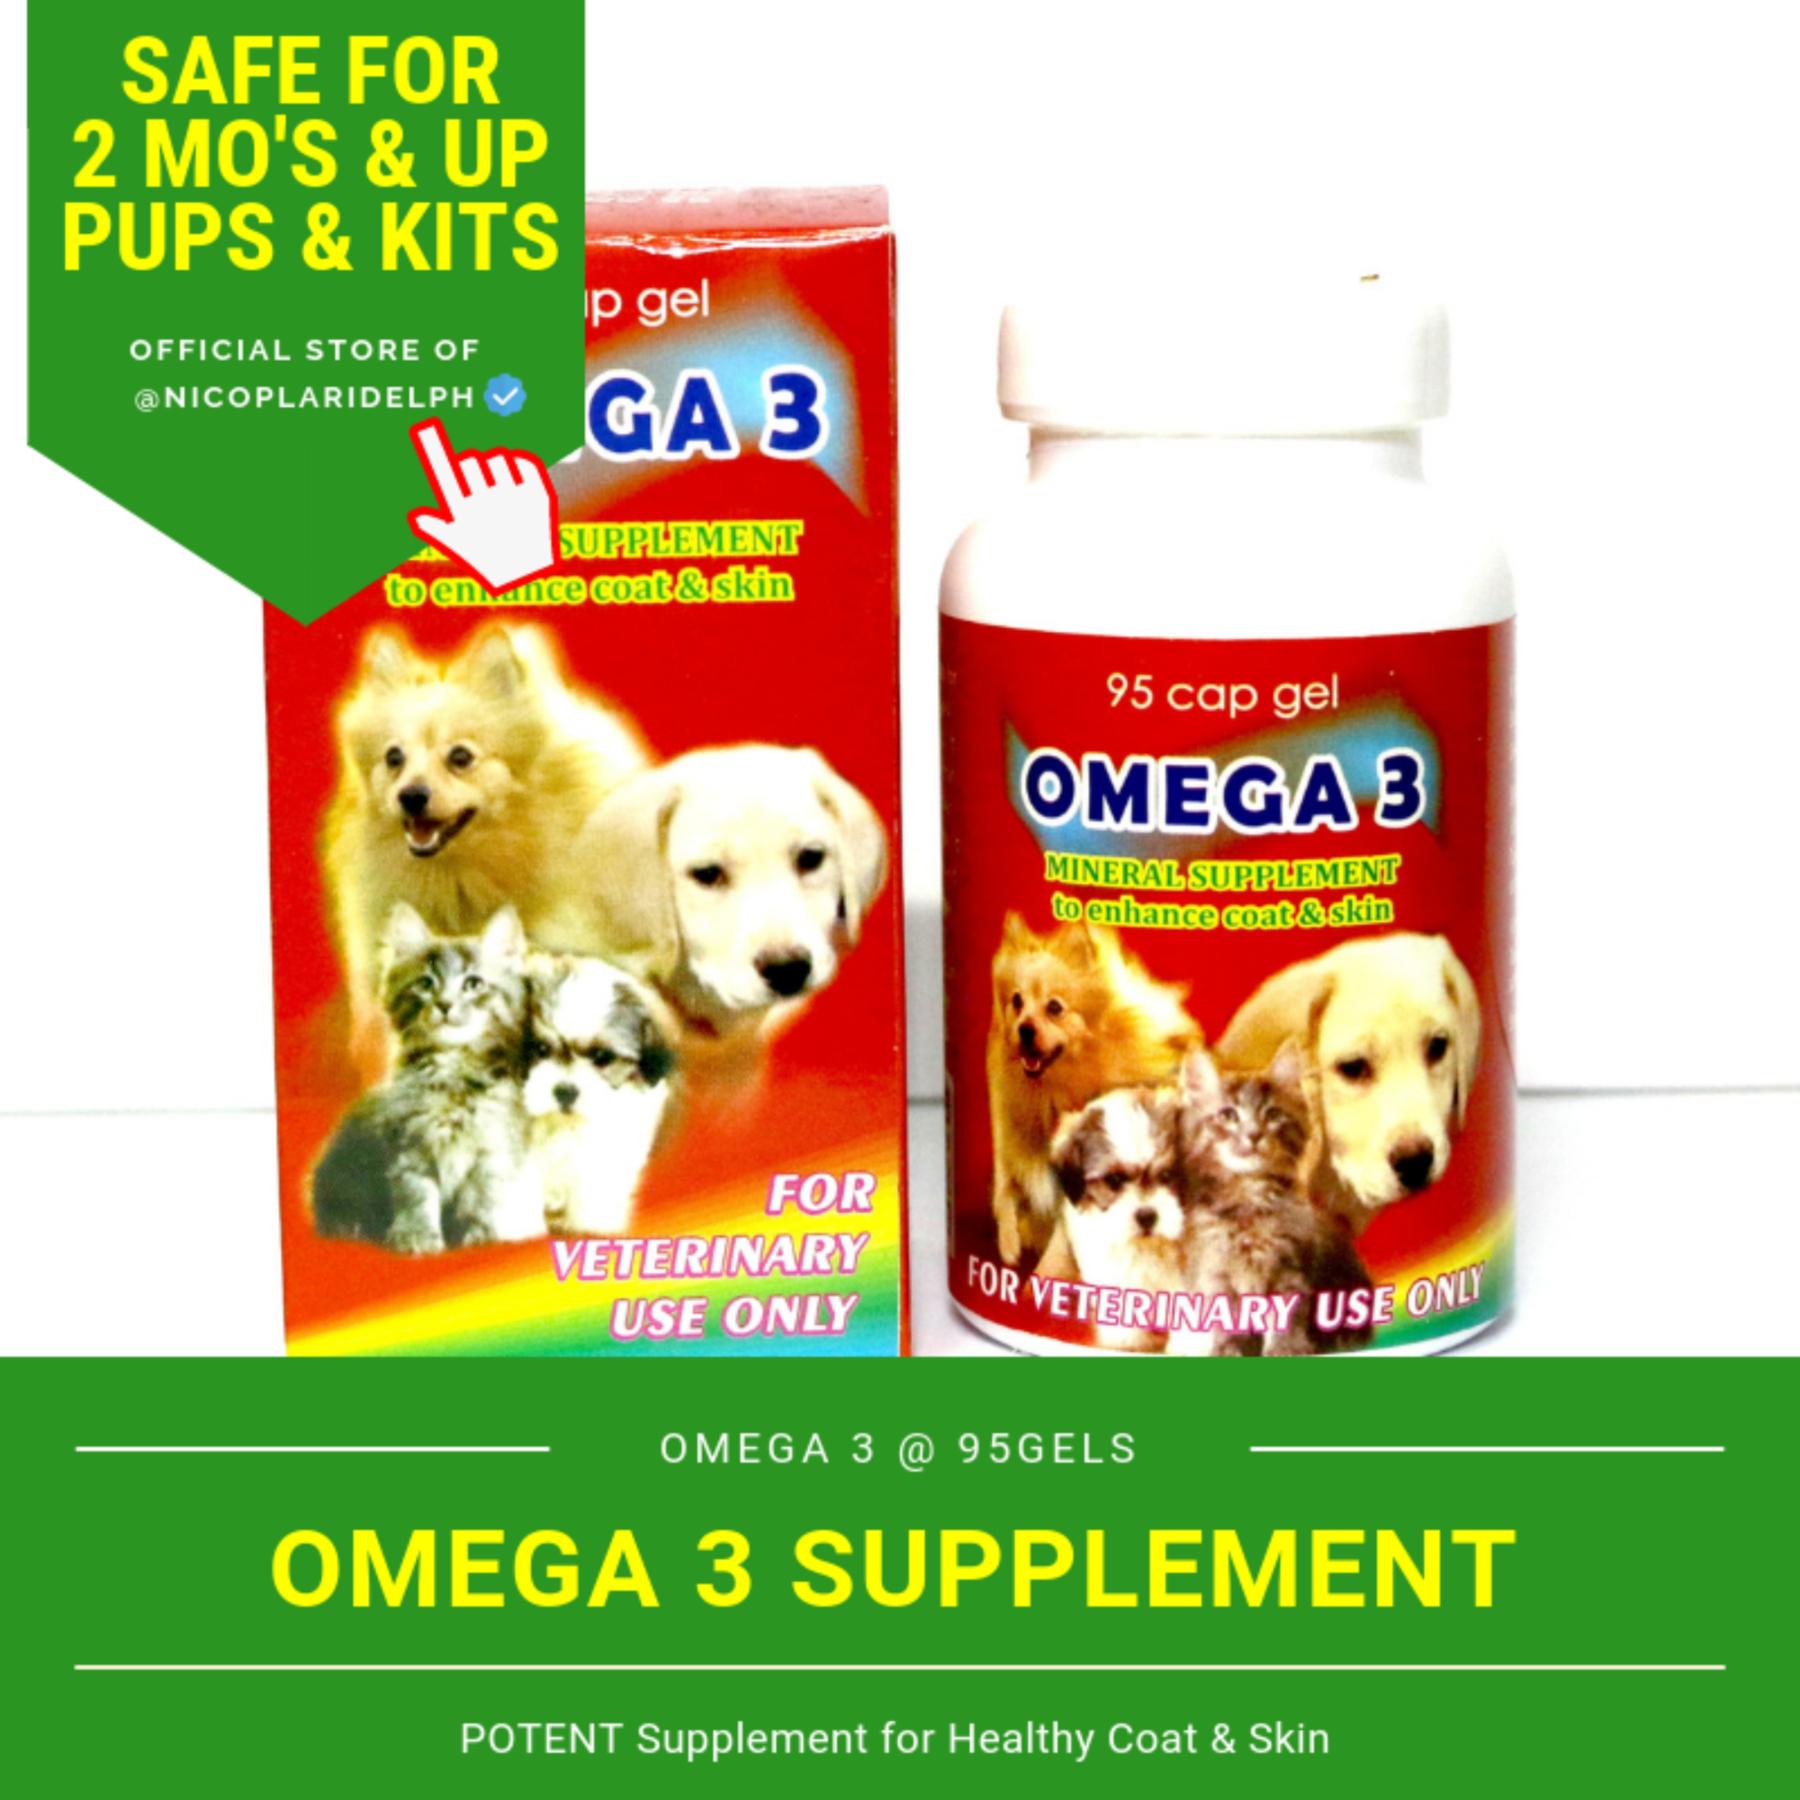 are omega 3 good for dogs